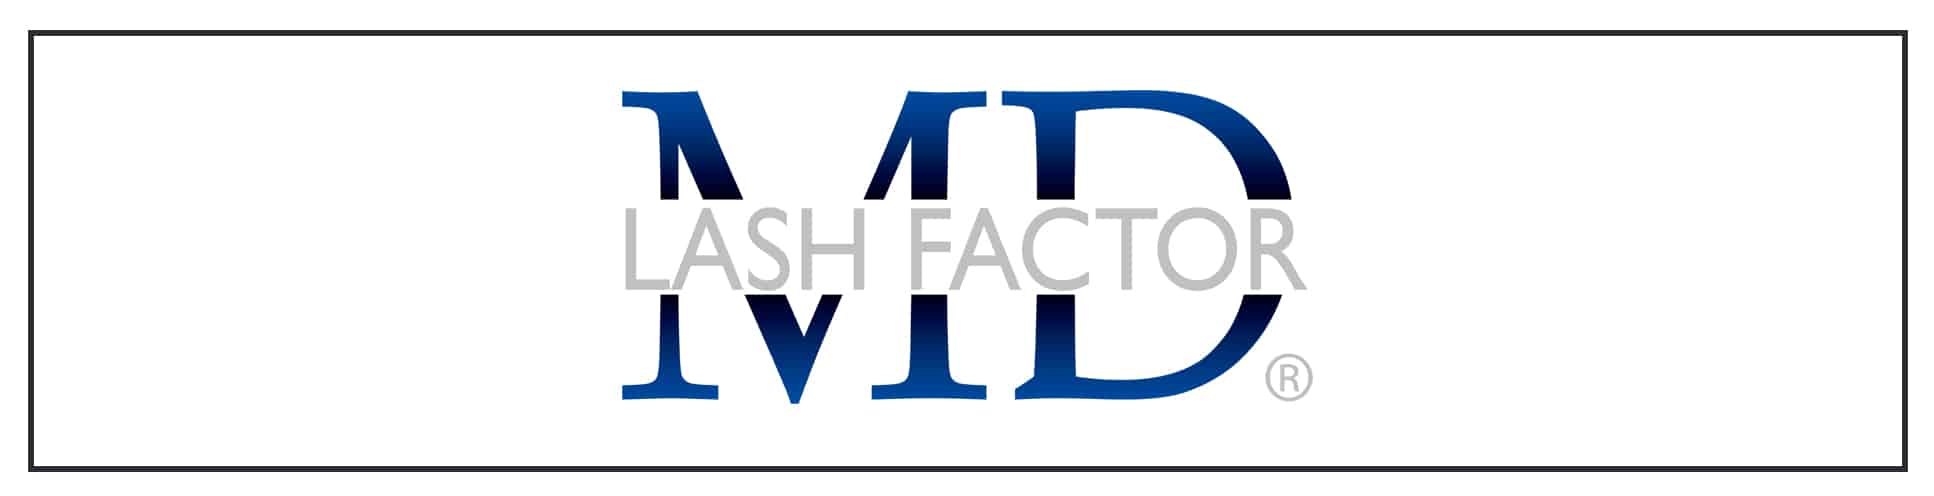 The lash factor logo on a white background.